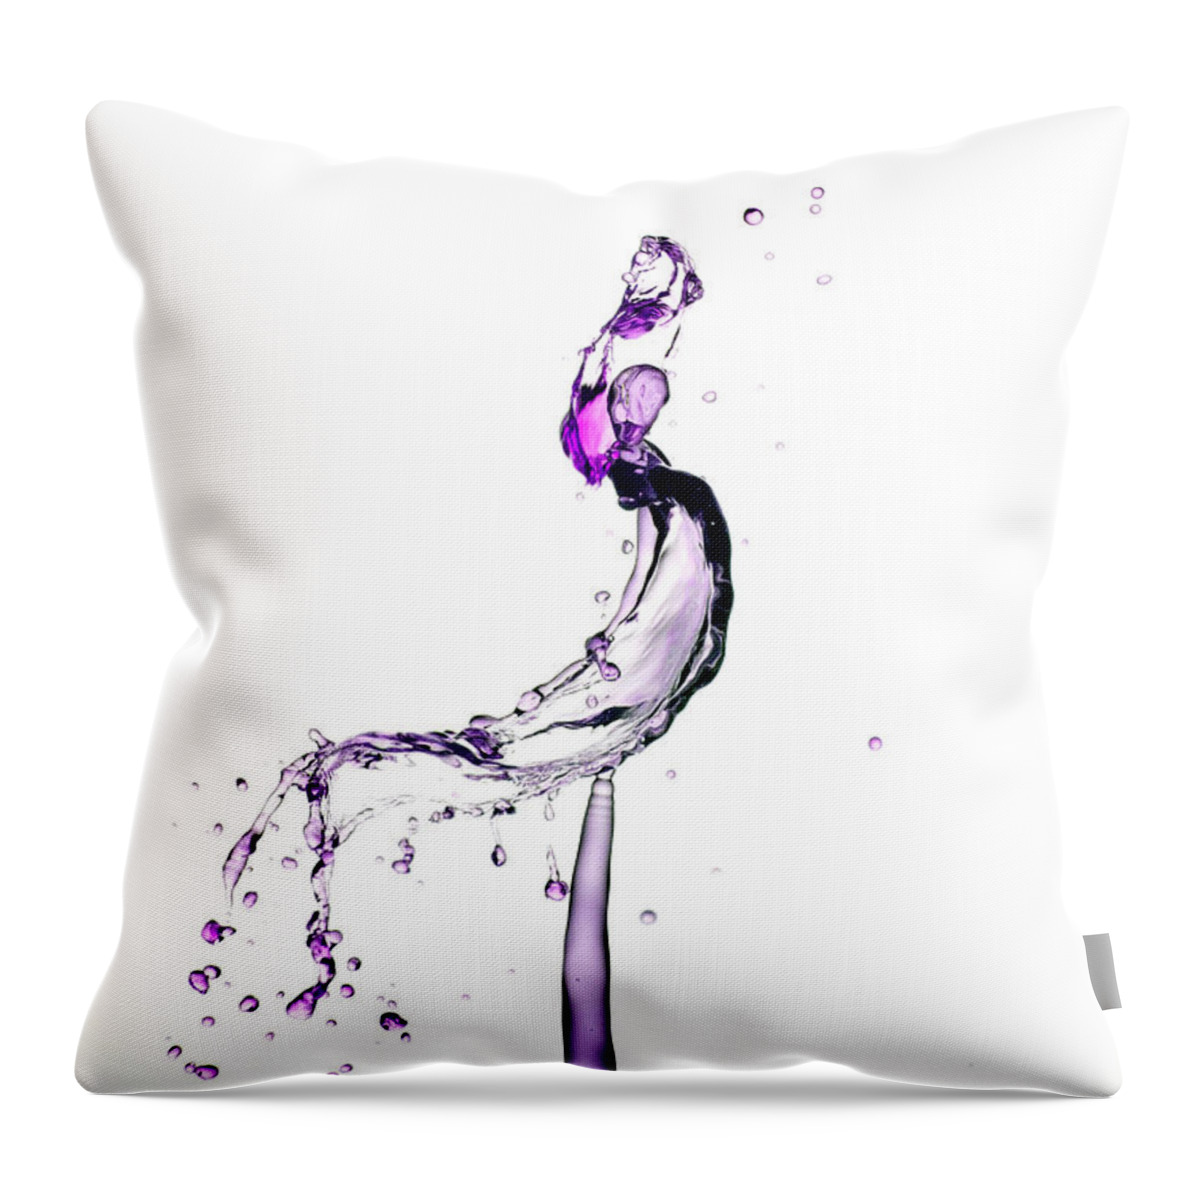 Collision Throw Pillow featuring the photograph Water drop collision liquid art 9 by Paul Ge